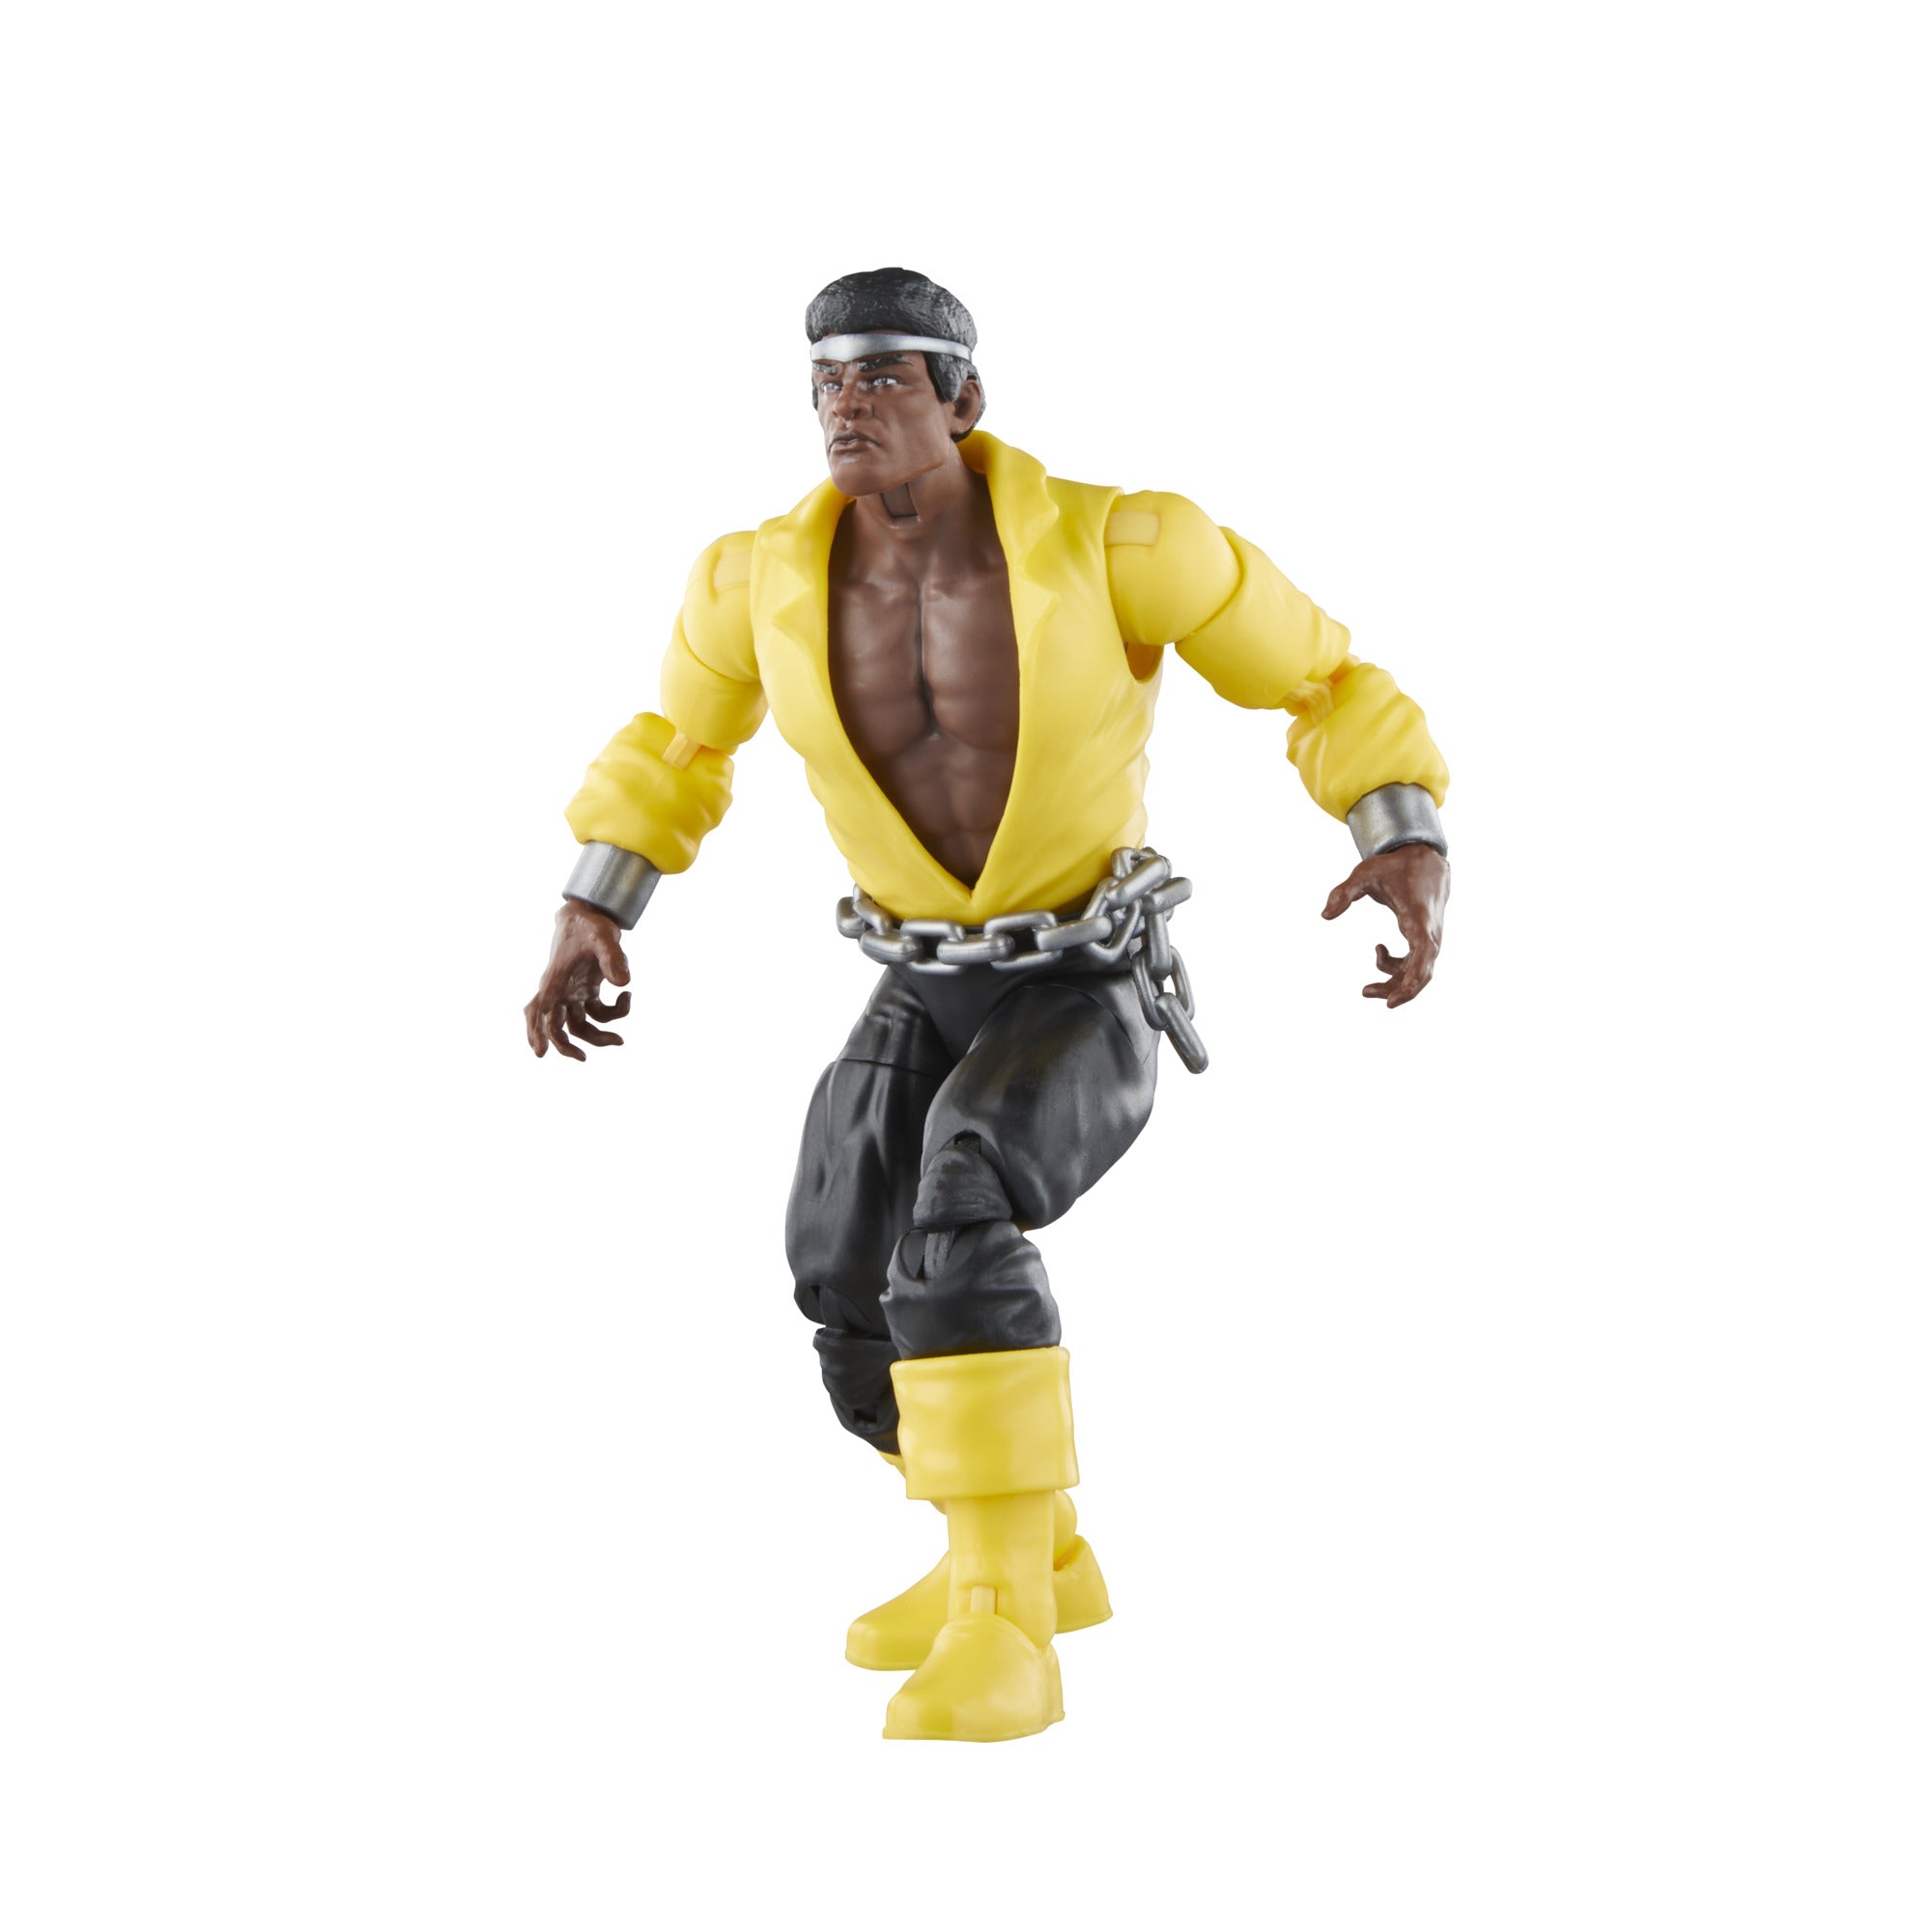 Marvel Knights Legends Luke Cage Power Man 6-Inch Action Figure - State of Comics